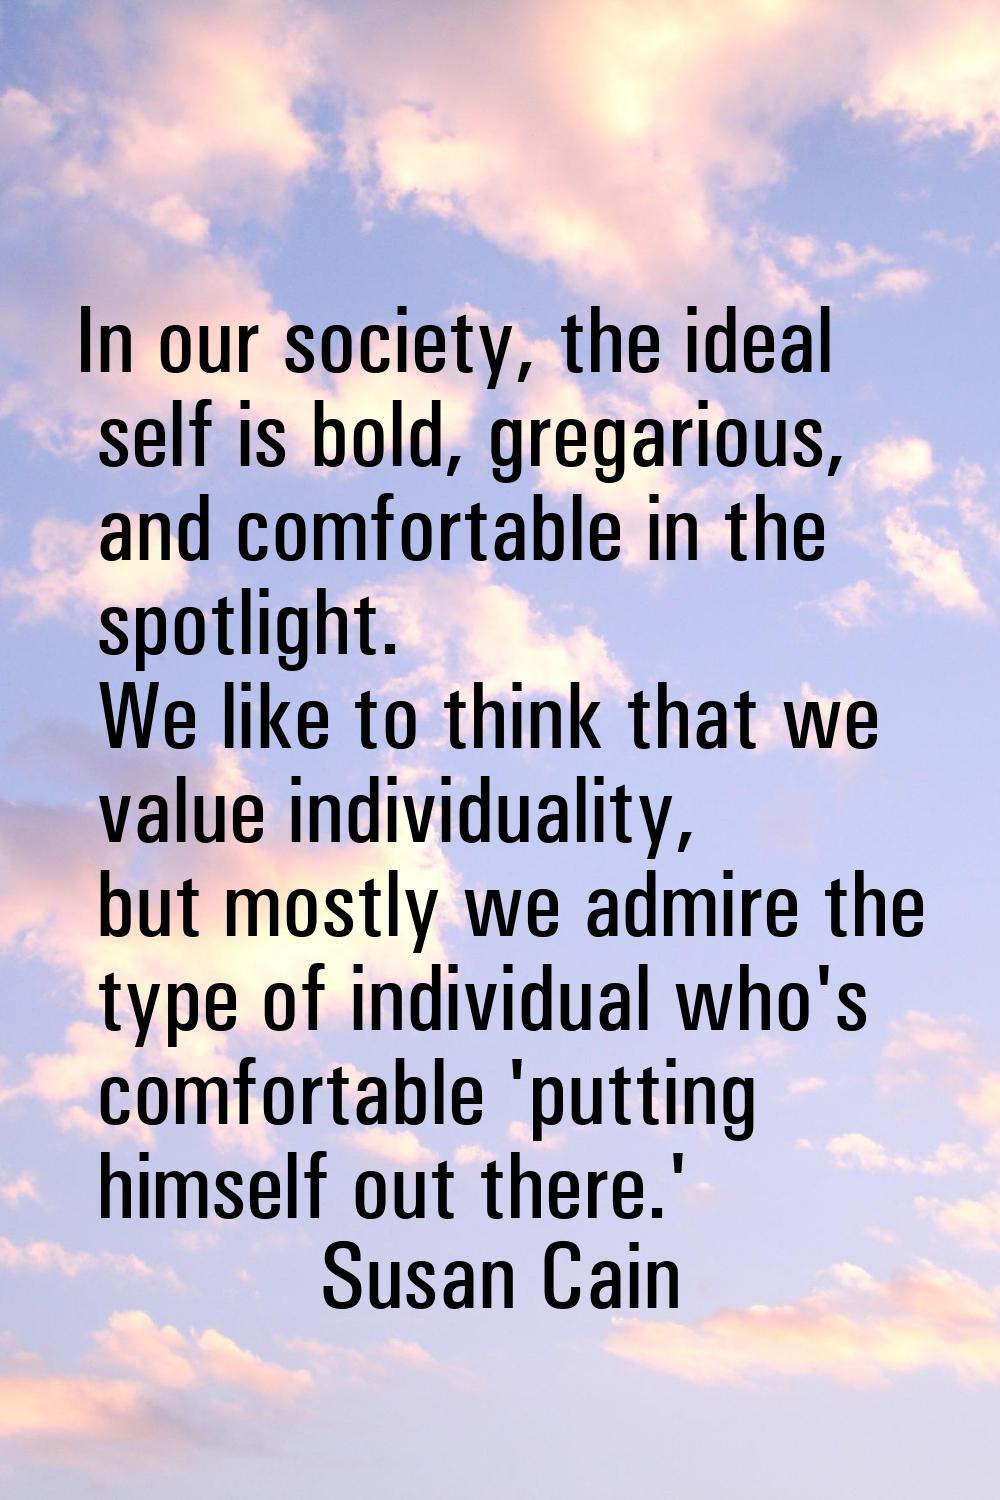 In our society, the ideal self is bold, gregarious, and comfortable in the spotlight. We like to th